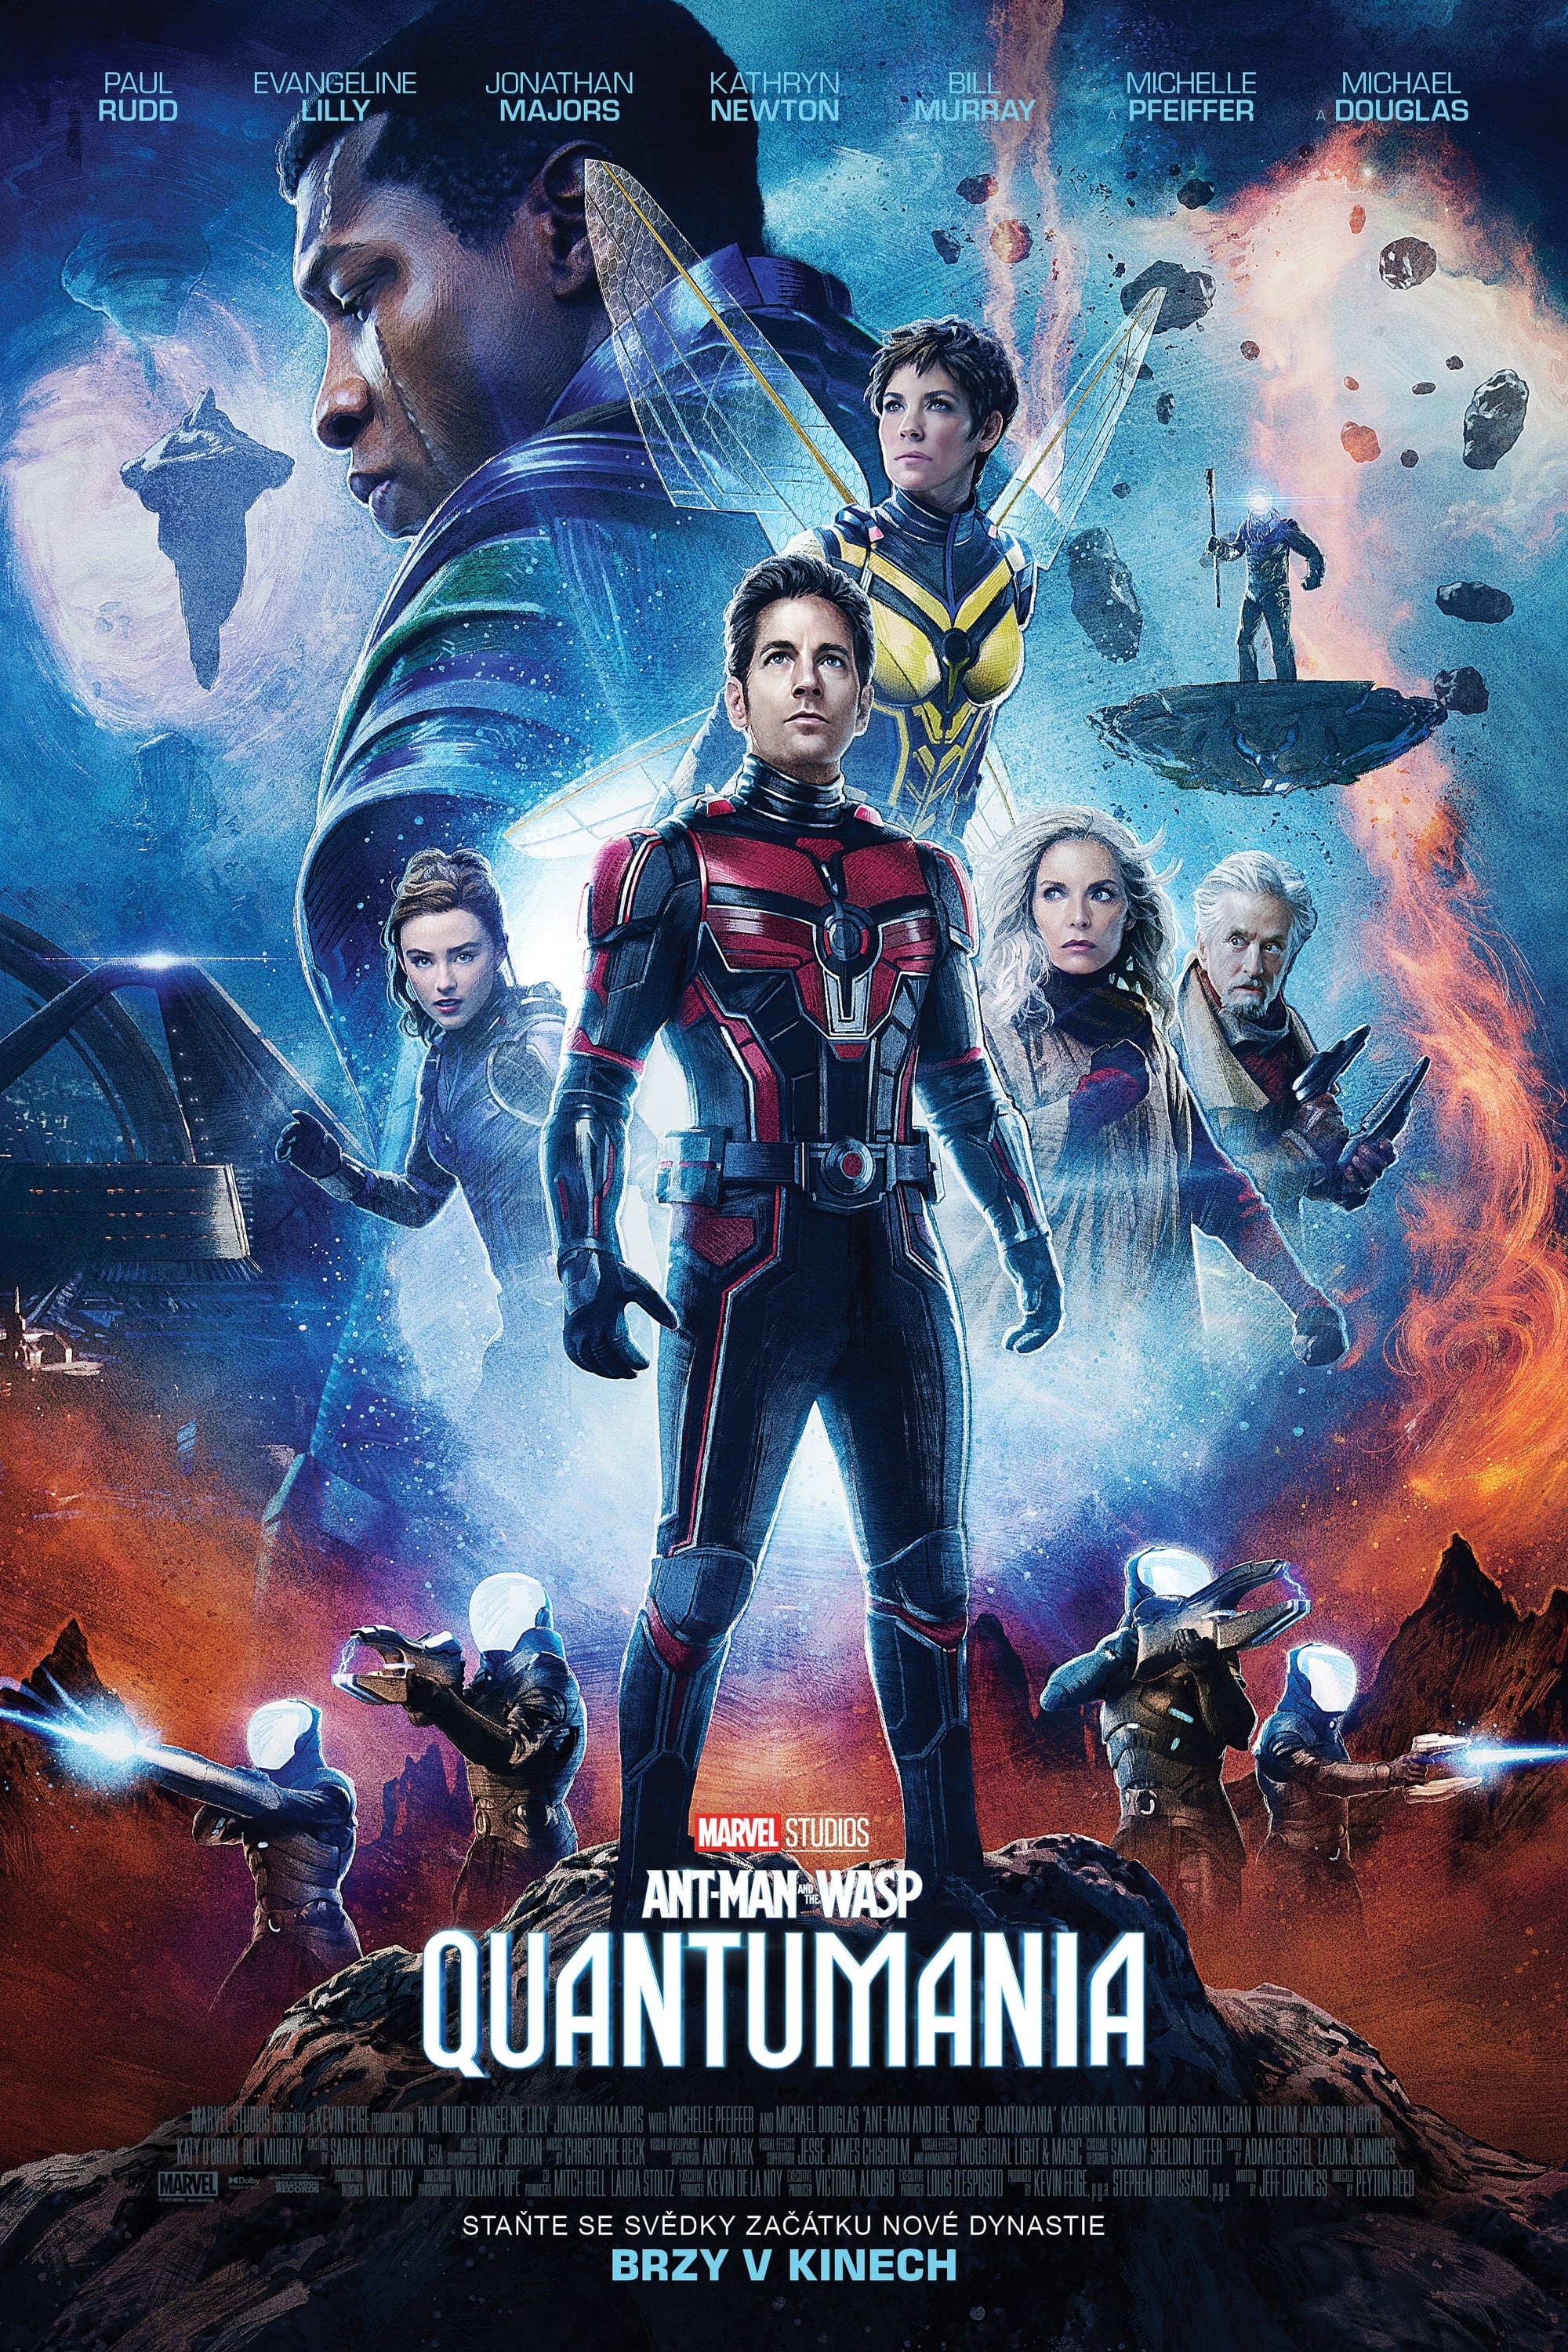 Ant-Man a Wasp: Quantumania / Ant-Man and the Wasp: Quantumania (2023)(CZ/SK/EN....)(Blu Ray).(2160p)(HDR10, DoVi) = CSFD 55%